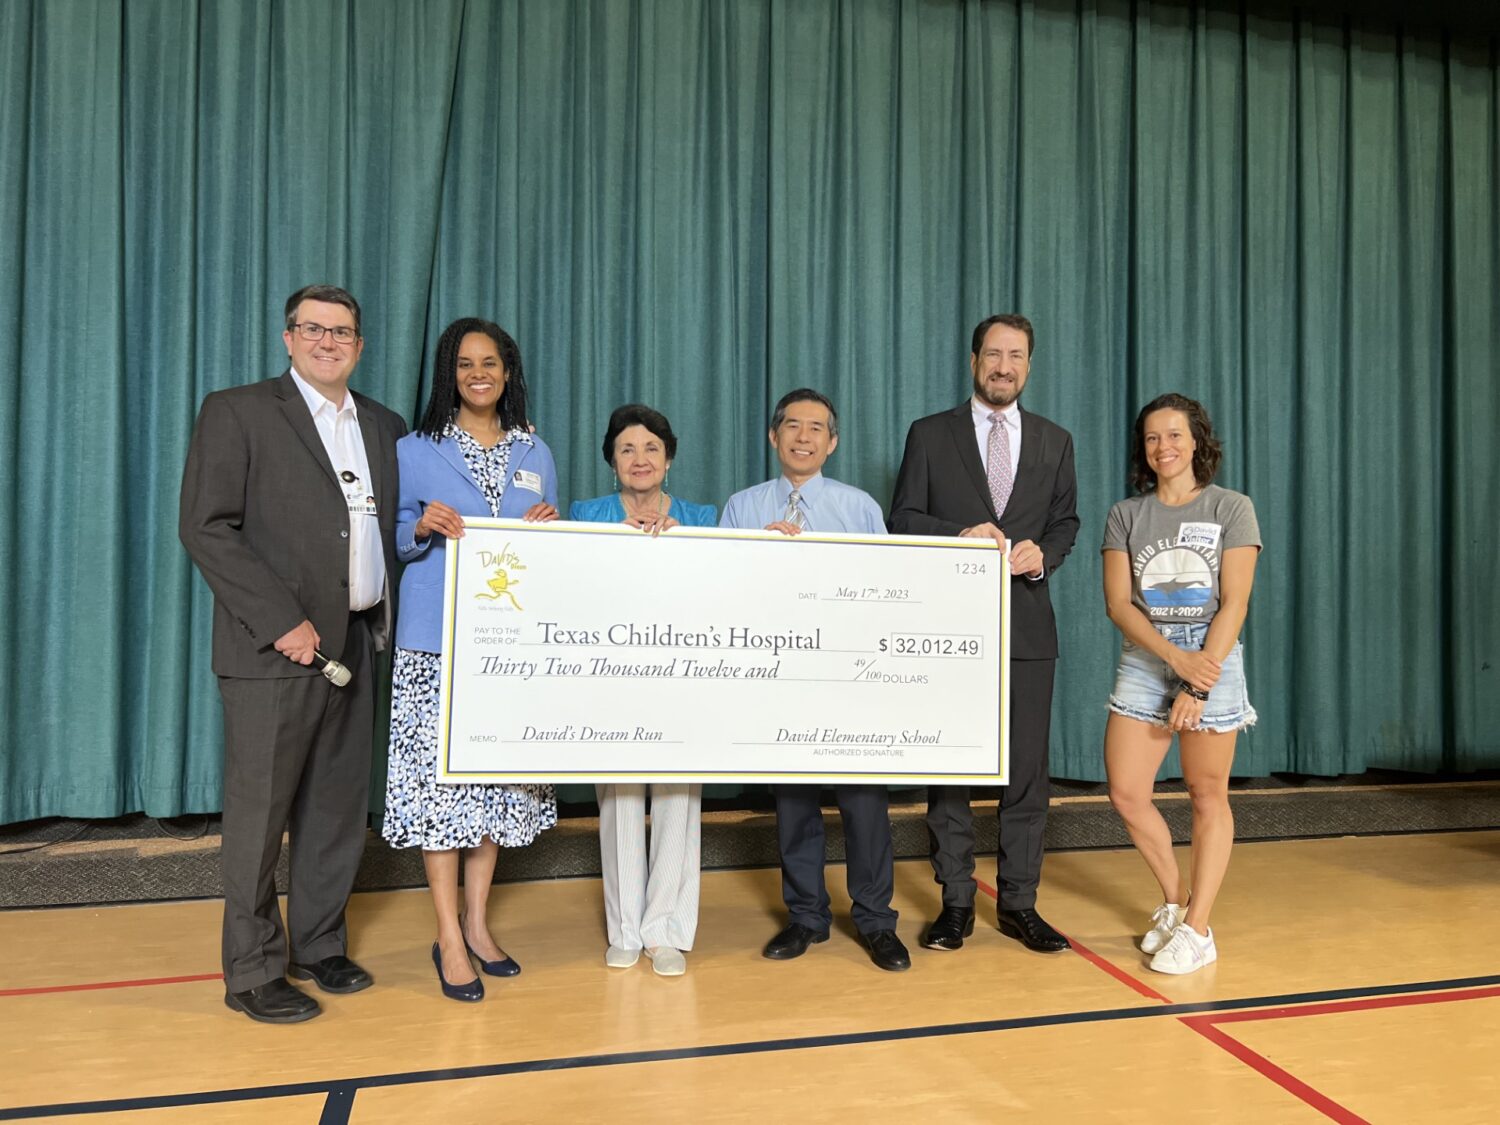 Congratulations to the students and staff at David Elementary for raising and donating $32,012.49 for Texas Children's Hospital through the David's Dream Run!